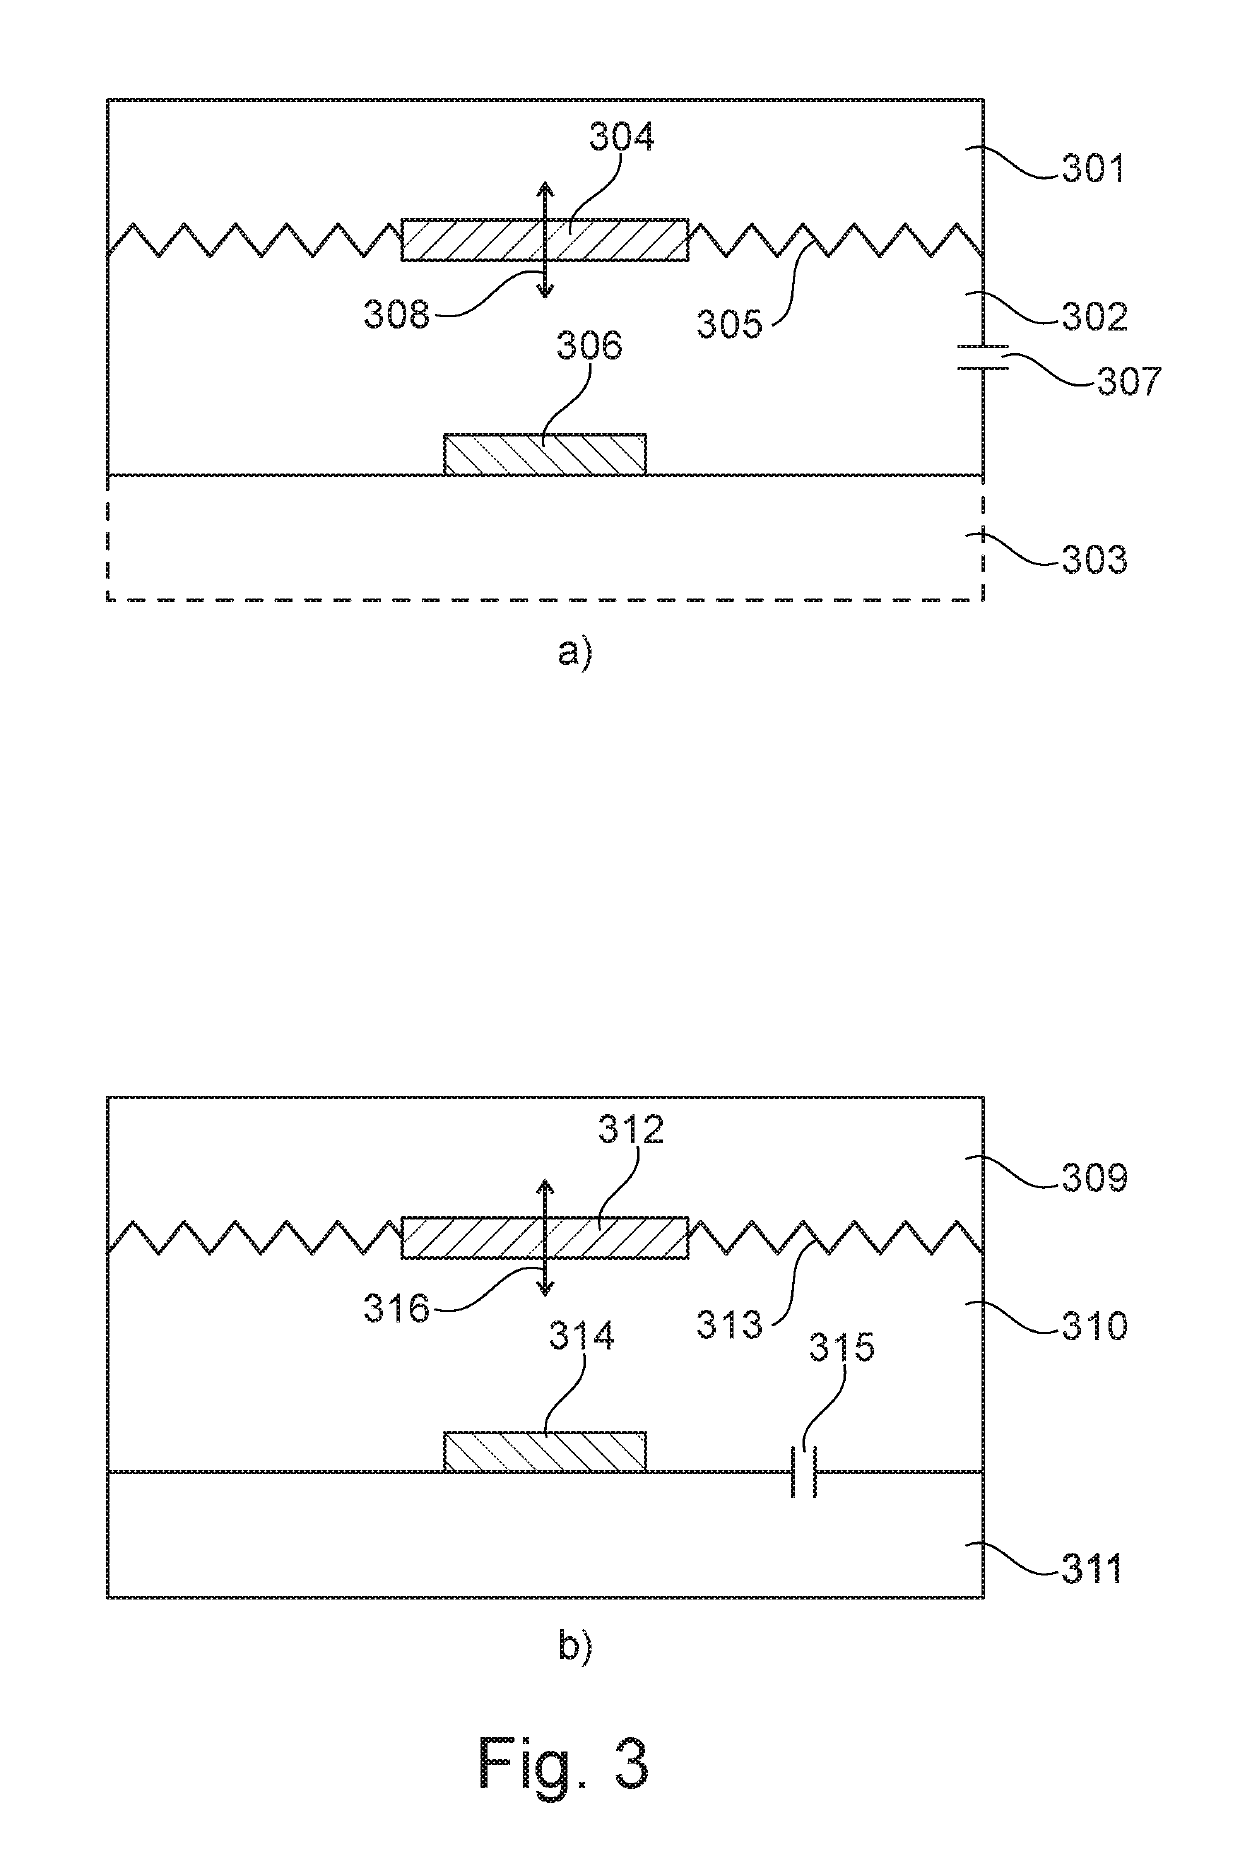 Vibration sensor with low-frequency roll-off response curve